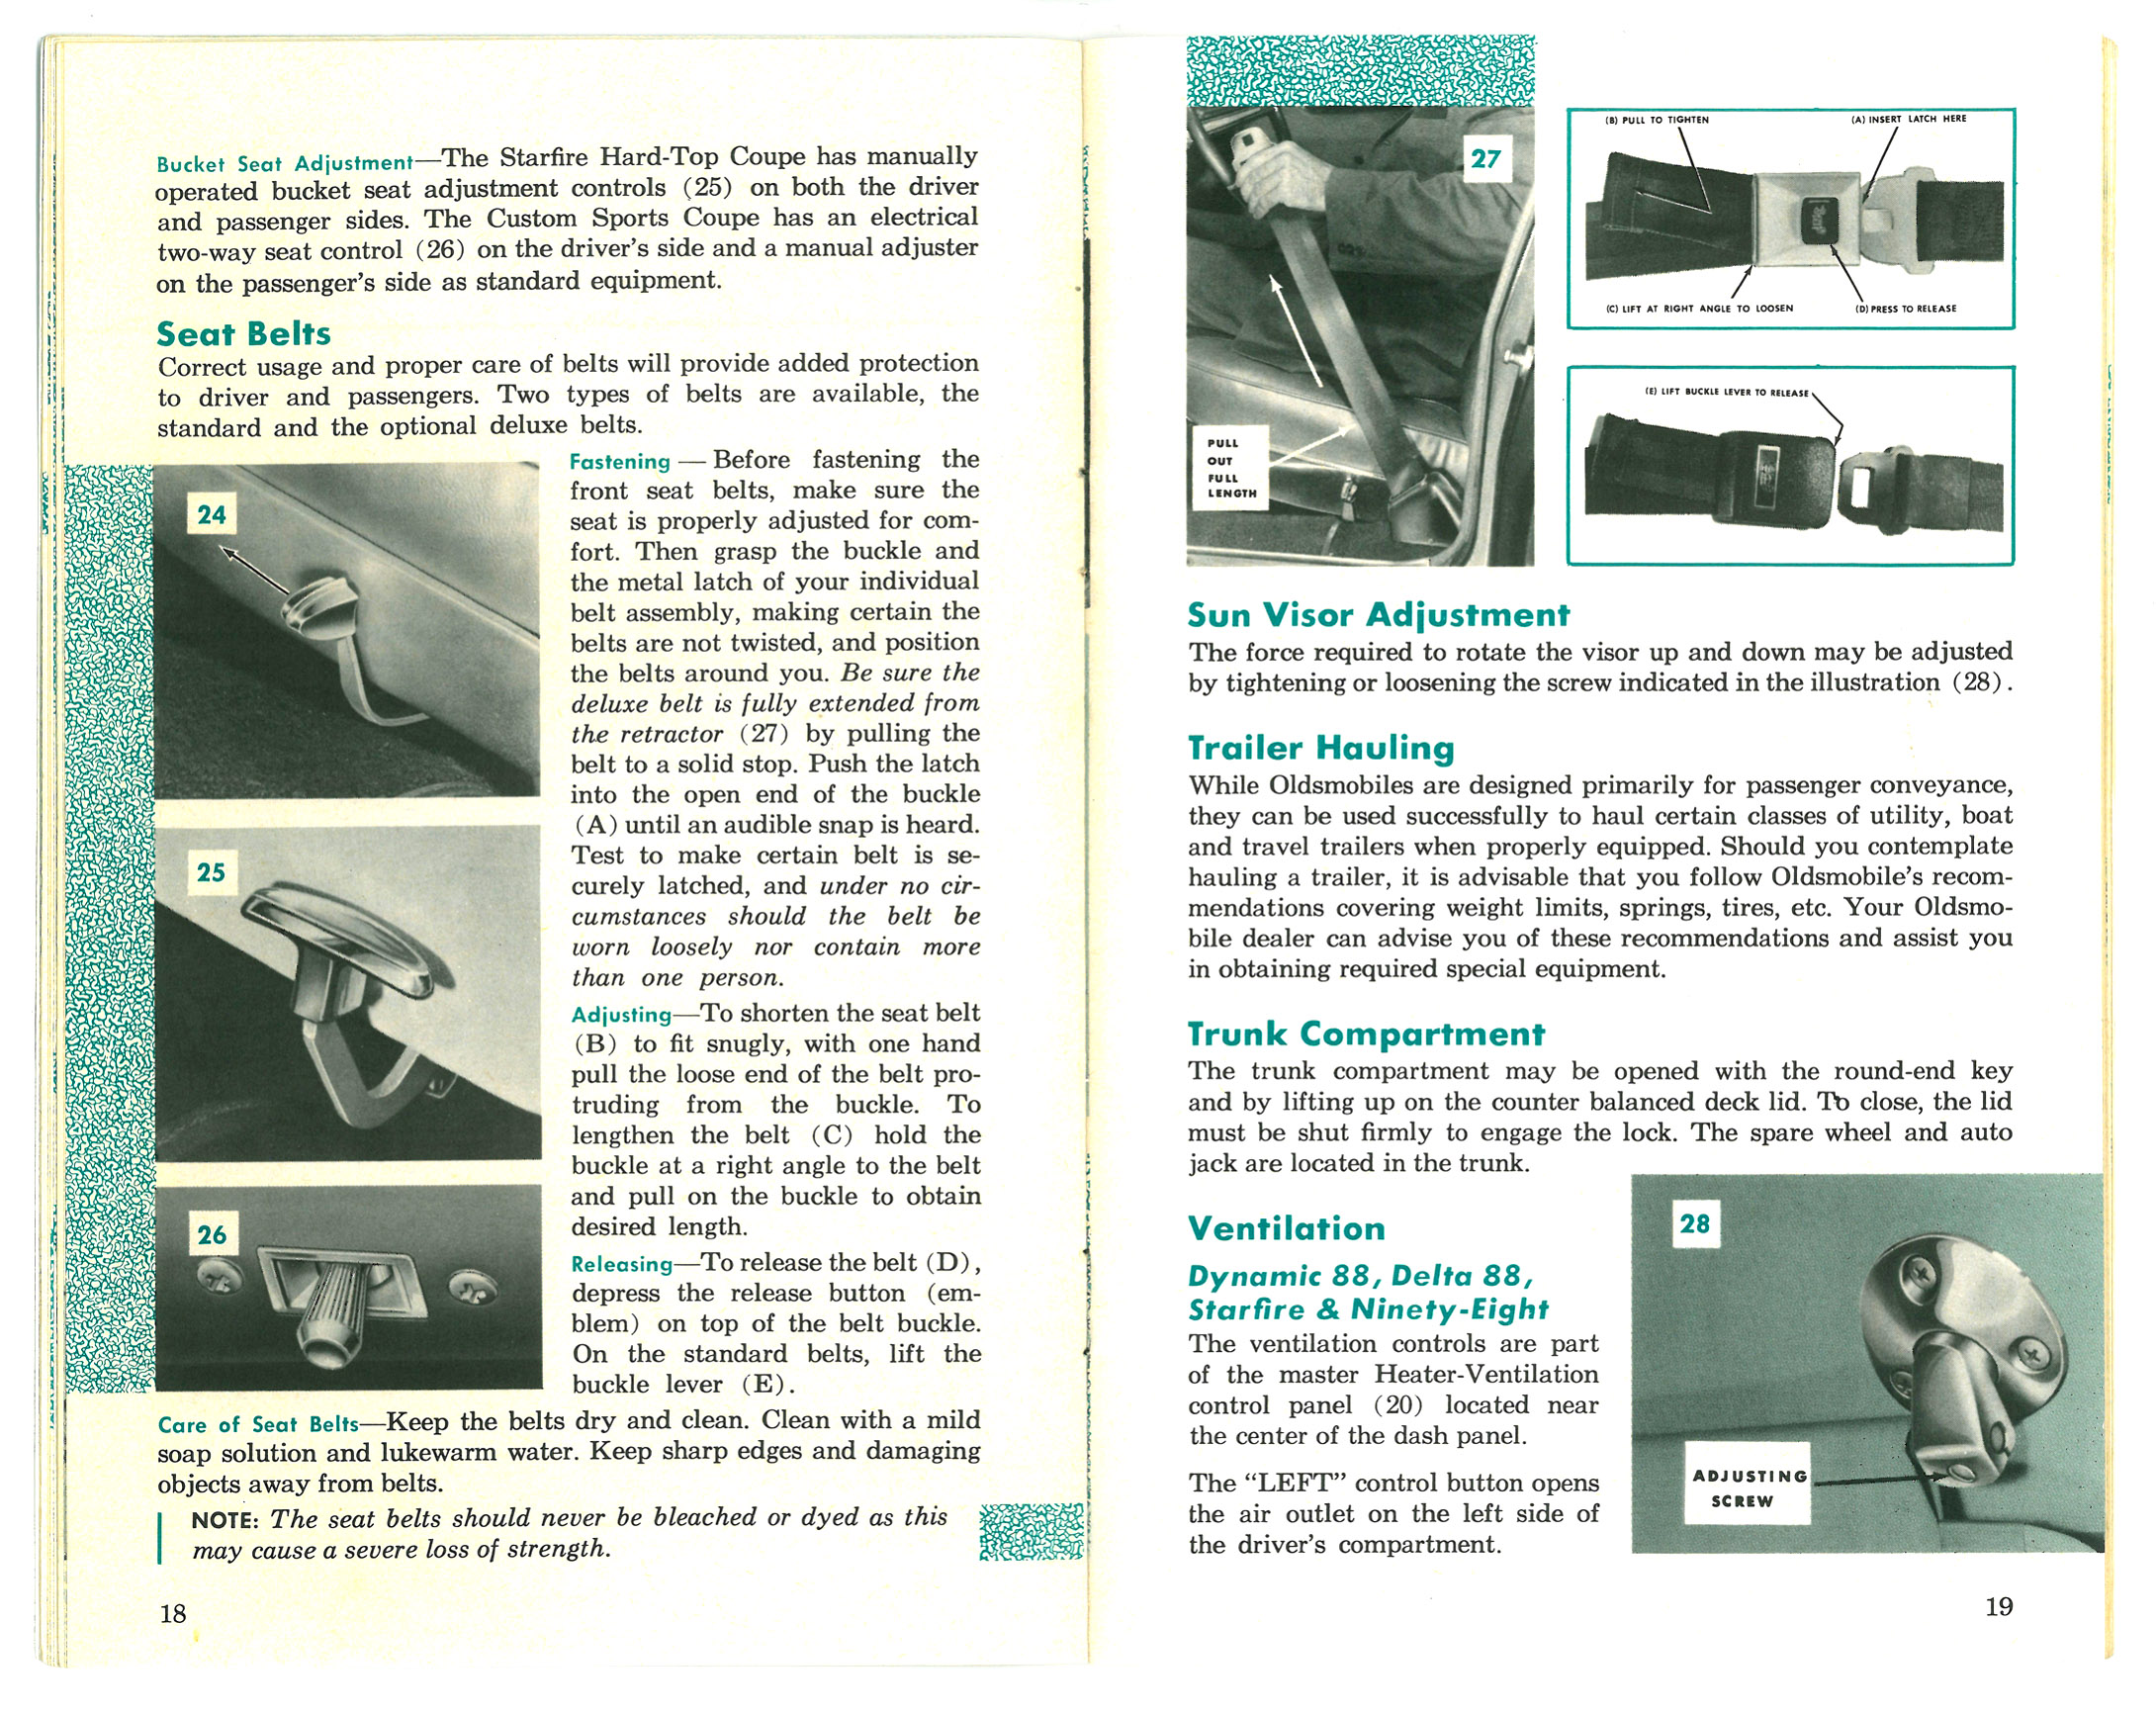 1966_Oldsmobile_owner_operating_manual_Page_11